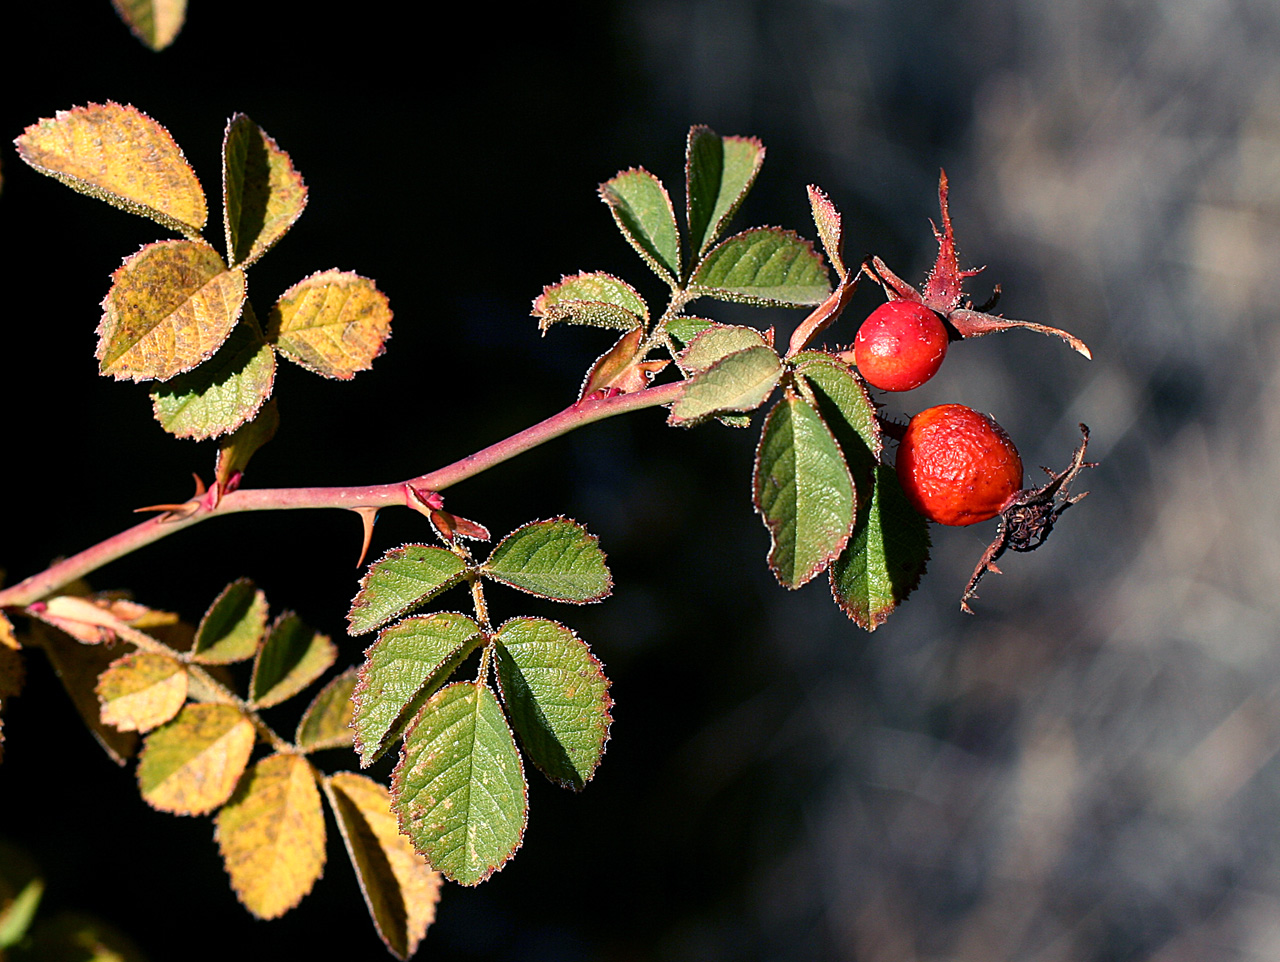 A twig with slightly burnished foliage and two bright red hips (fruits) retaining sepals from their flower stage